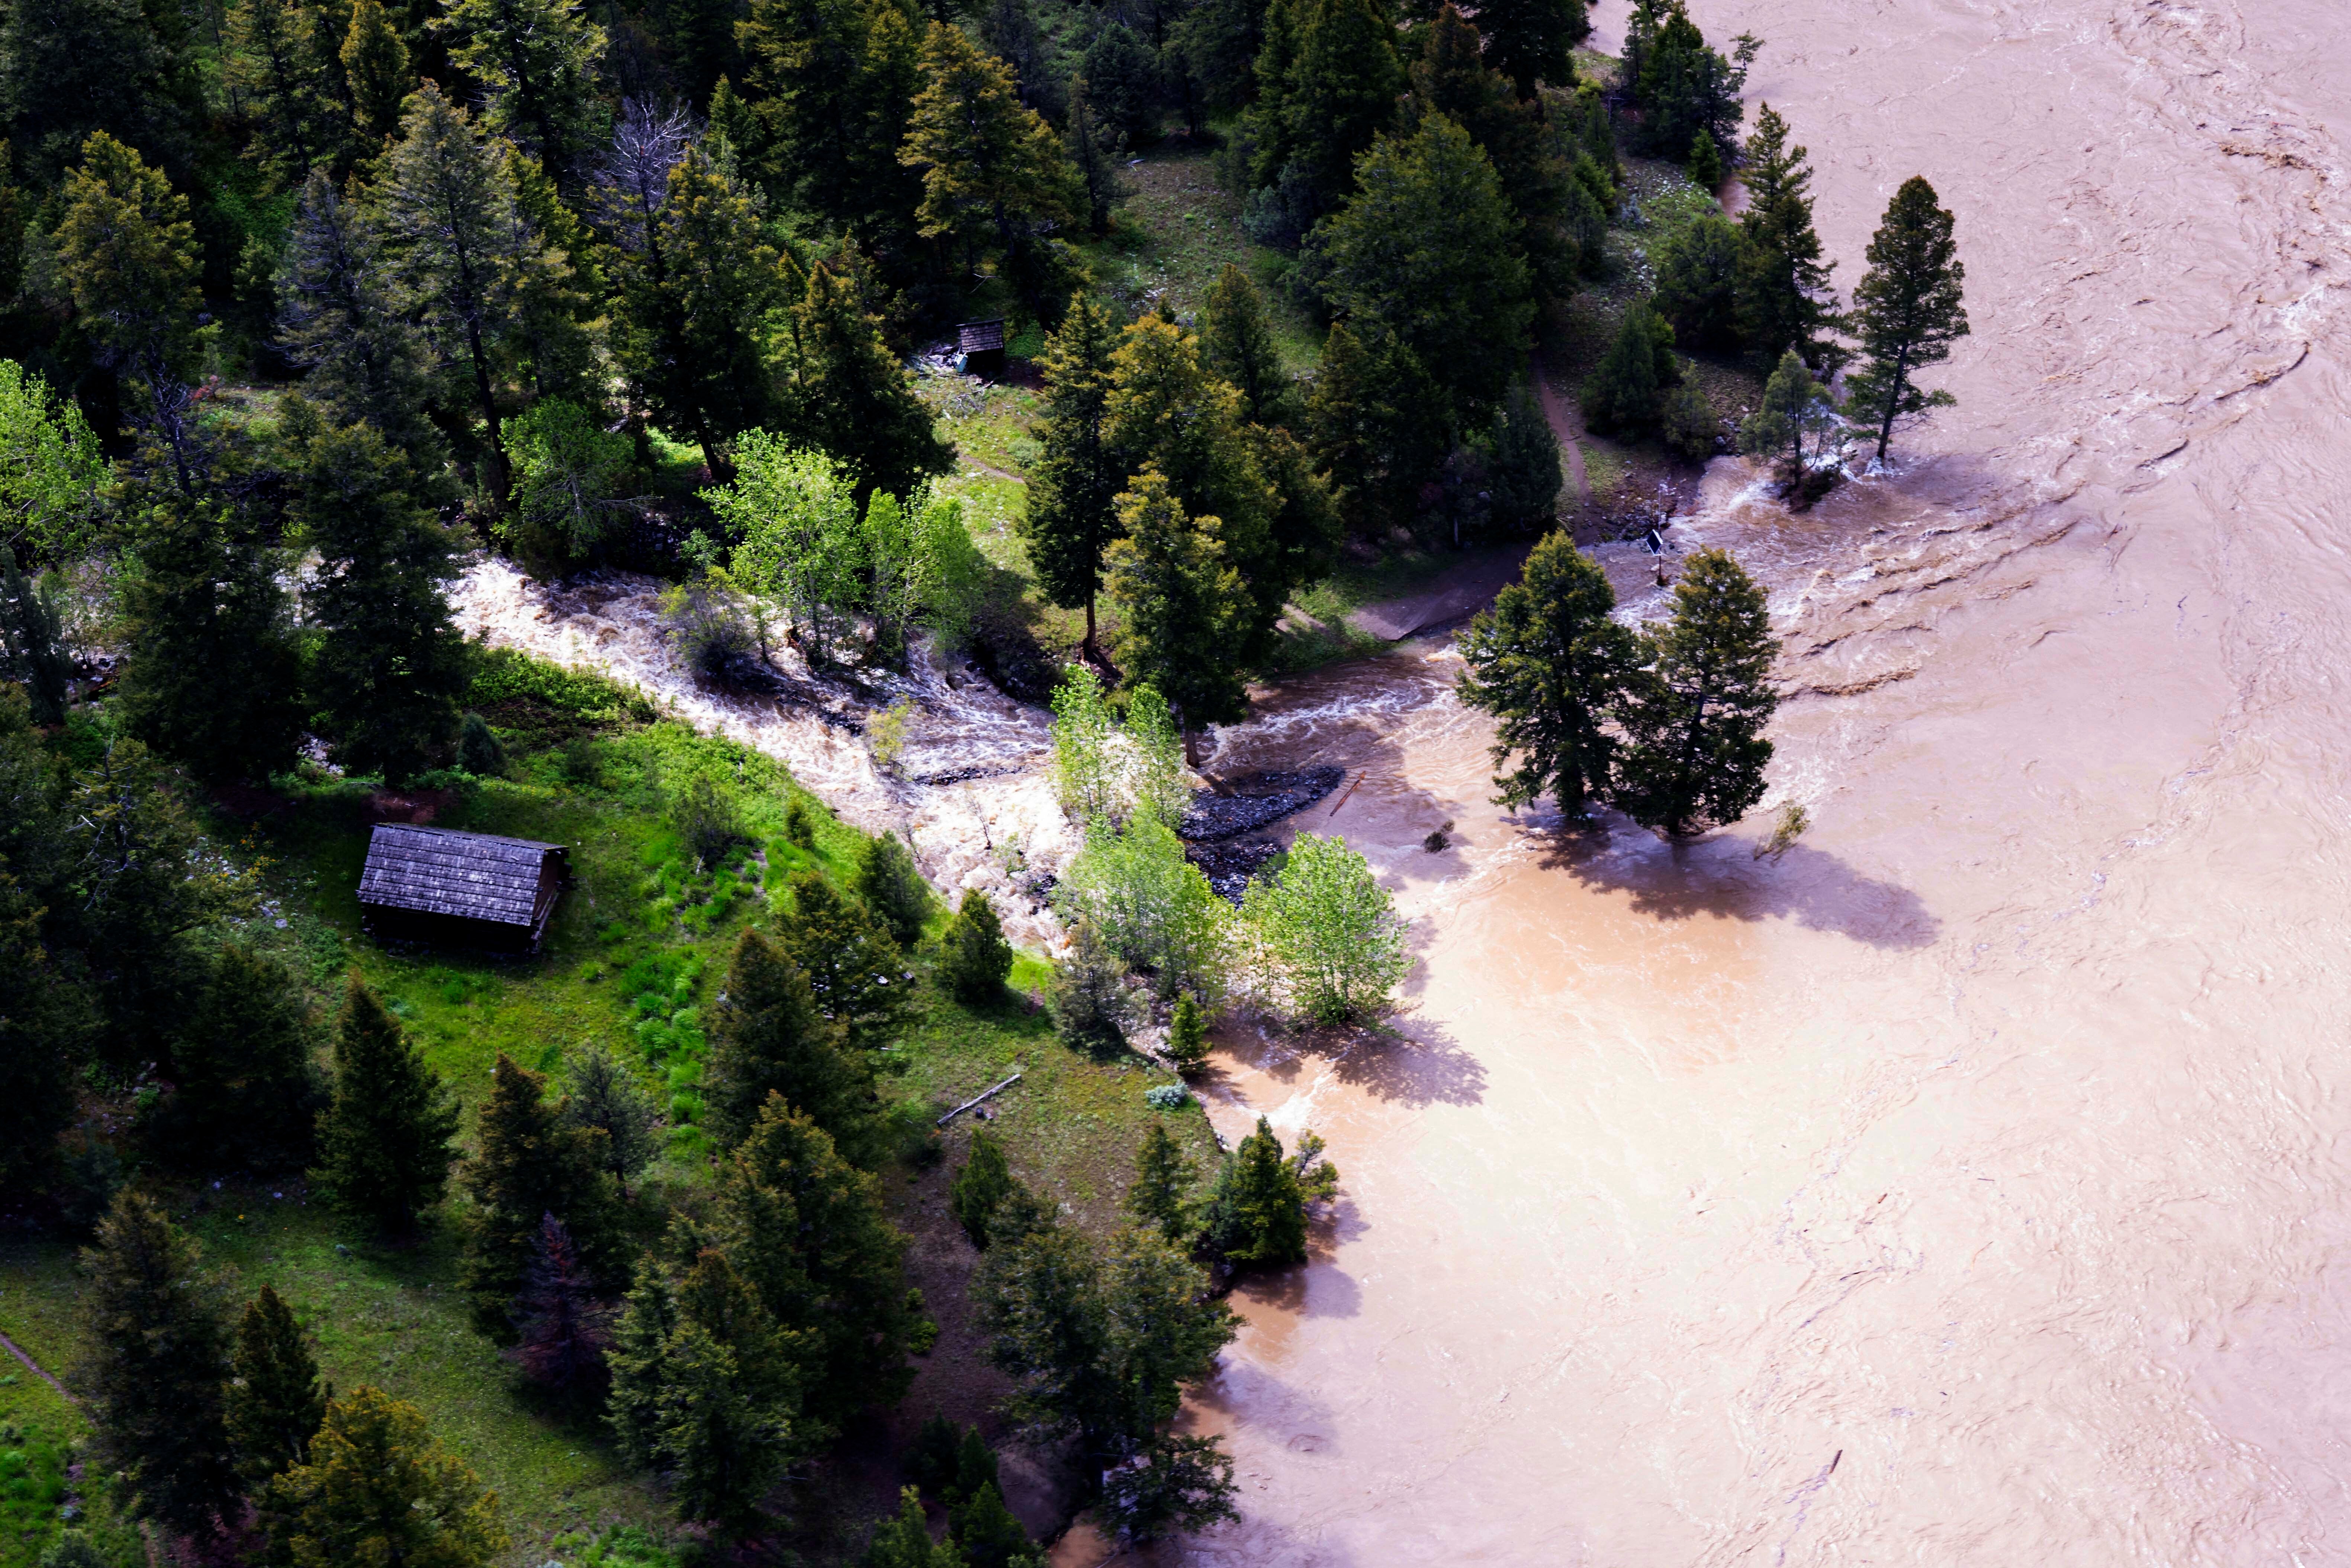 This aerial photo provided by the National Park Service shows the Lower  Blacktail Patrol Cabin washed away in Yellowstone National Park on  Monday, June 13, 2022.  (Photo: Jacob W. Frank/National Park Service, AP)